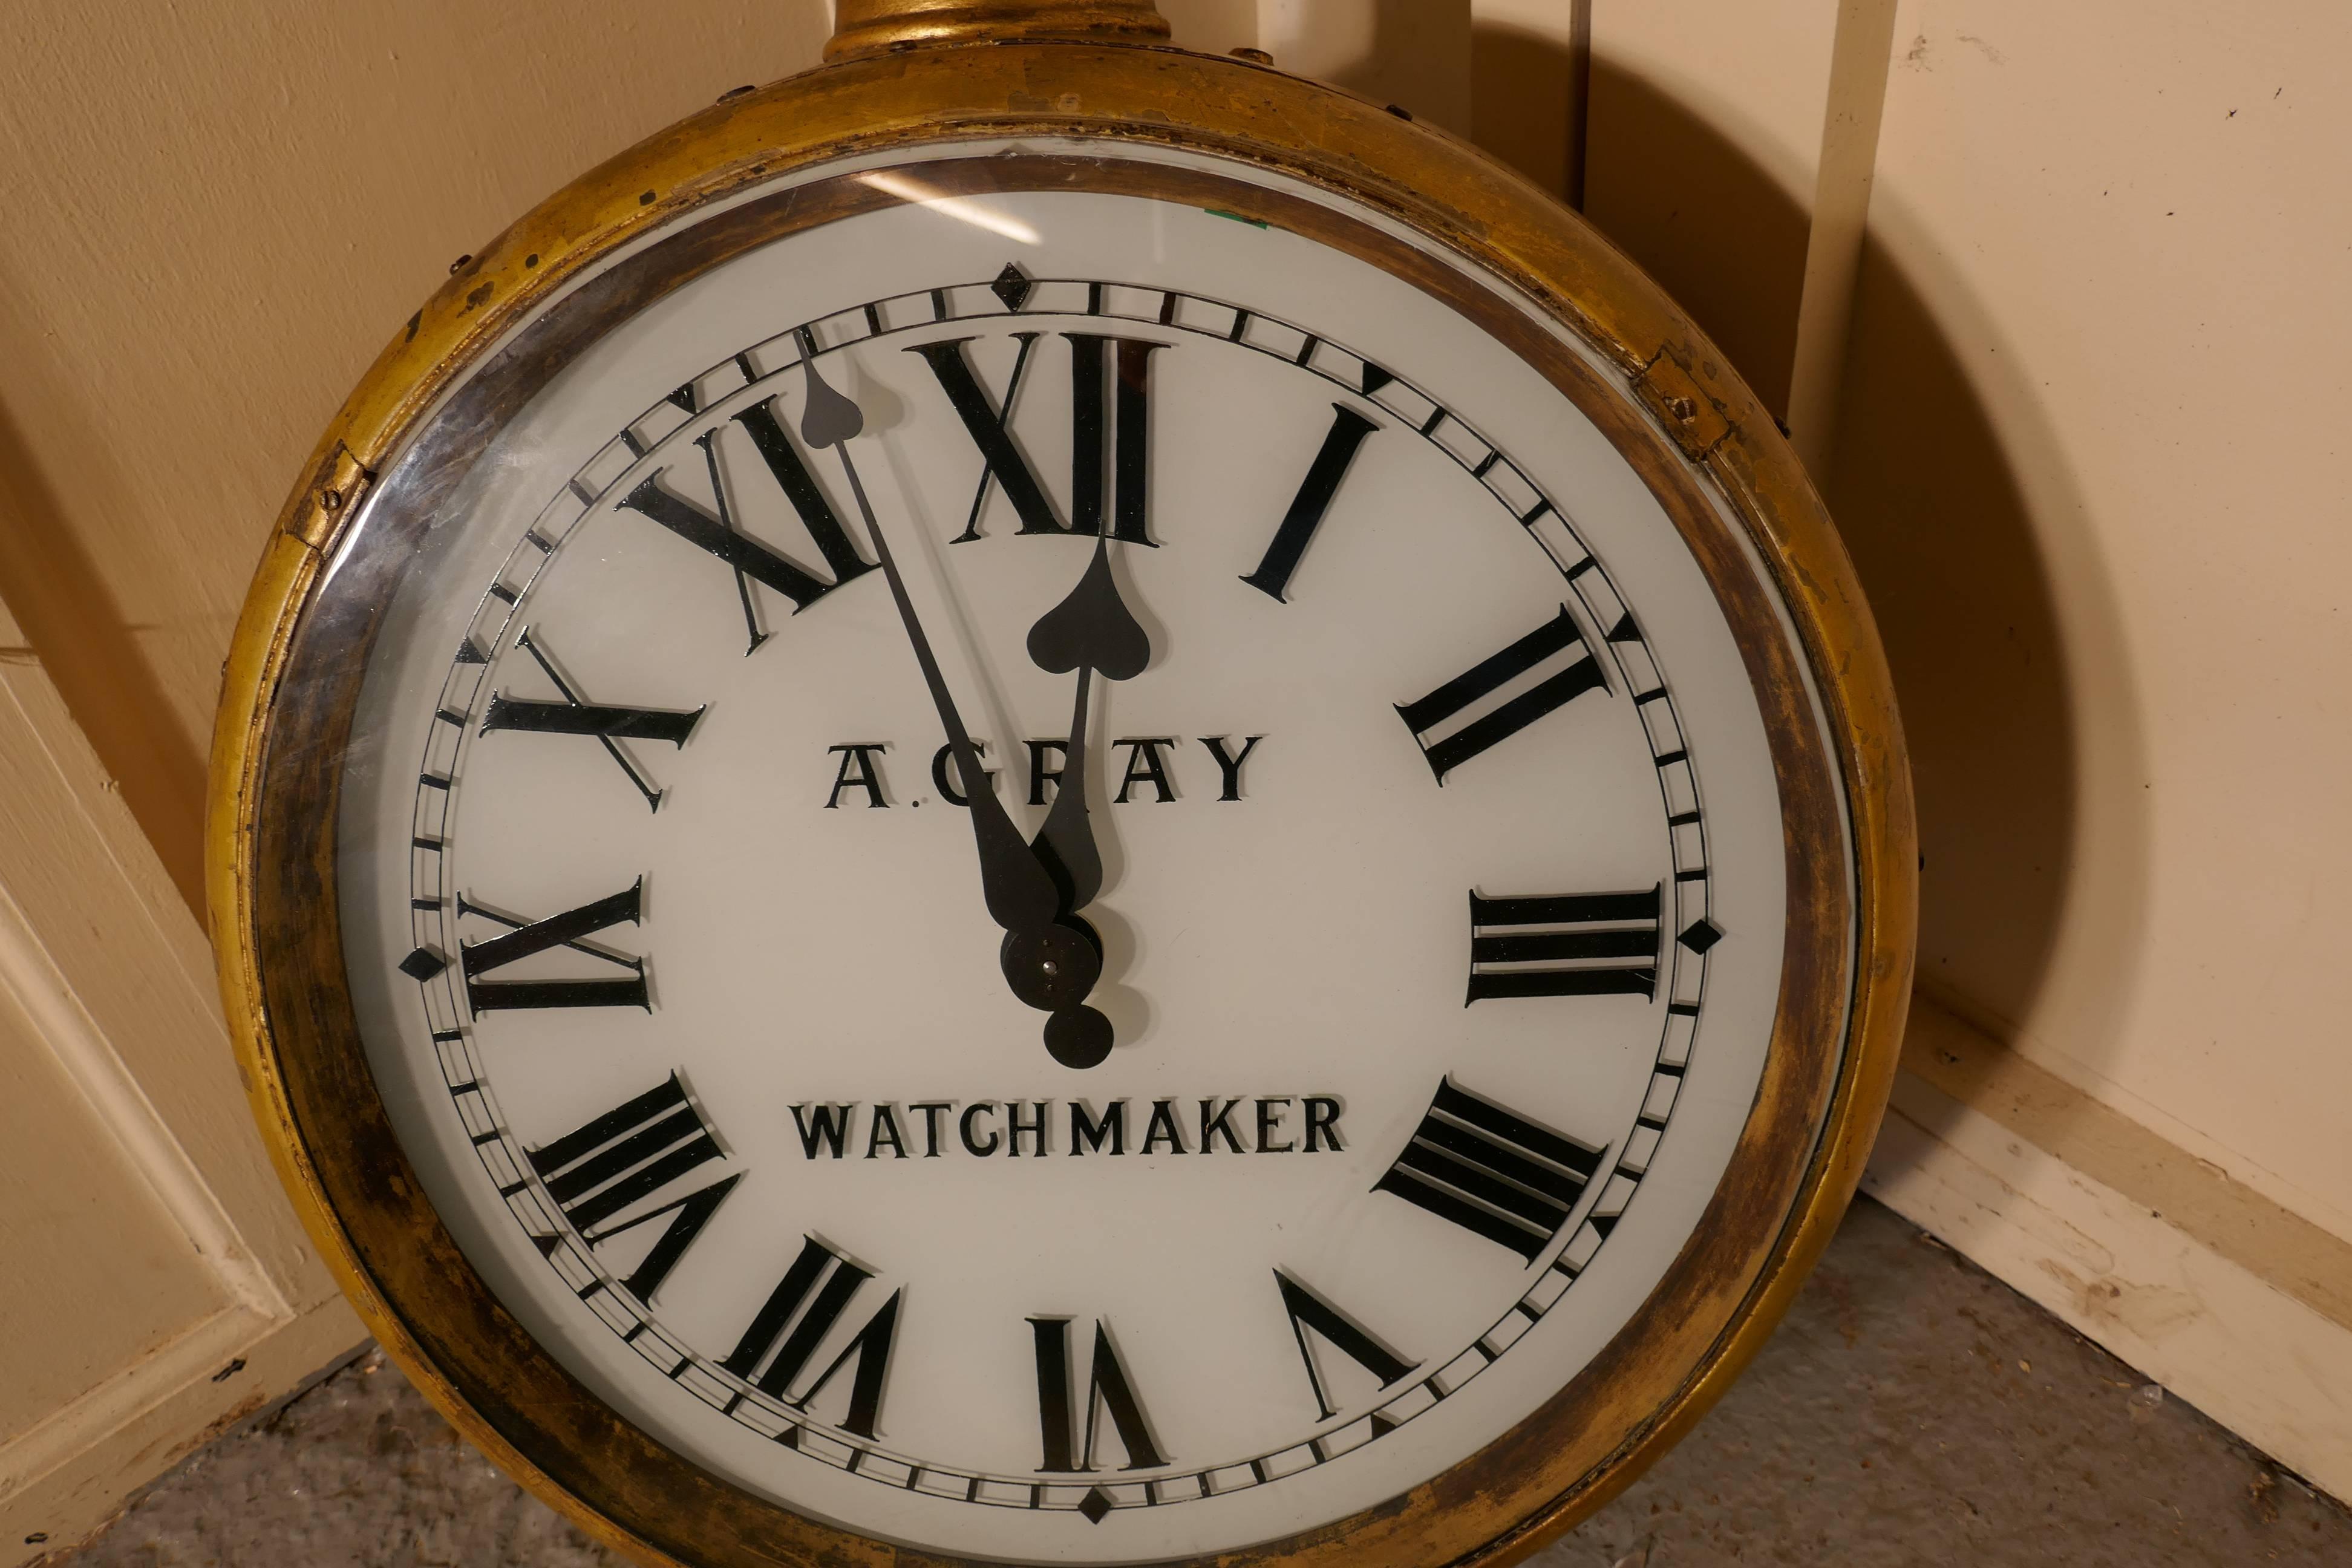 Industrial Watch Makers Shop Trades Sign, Giant Pocket Watch